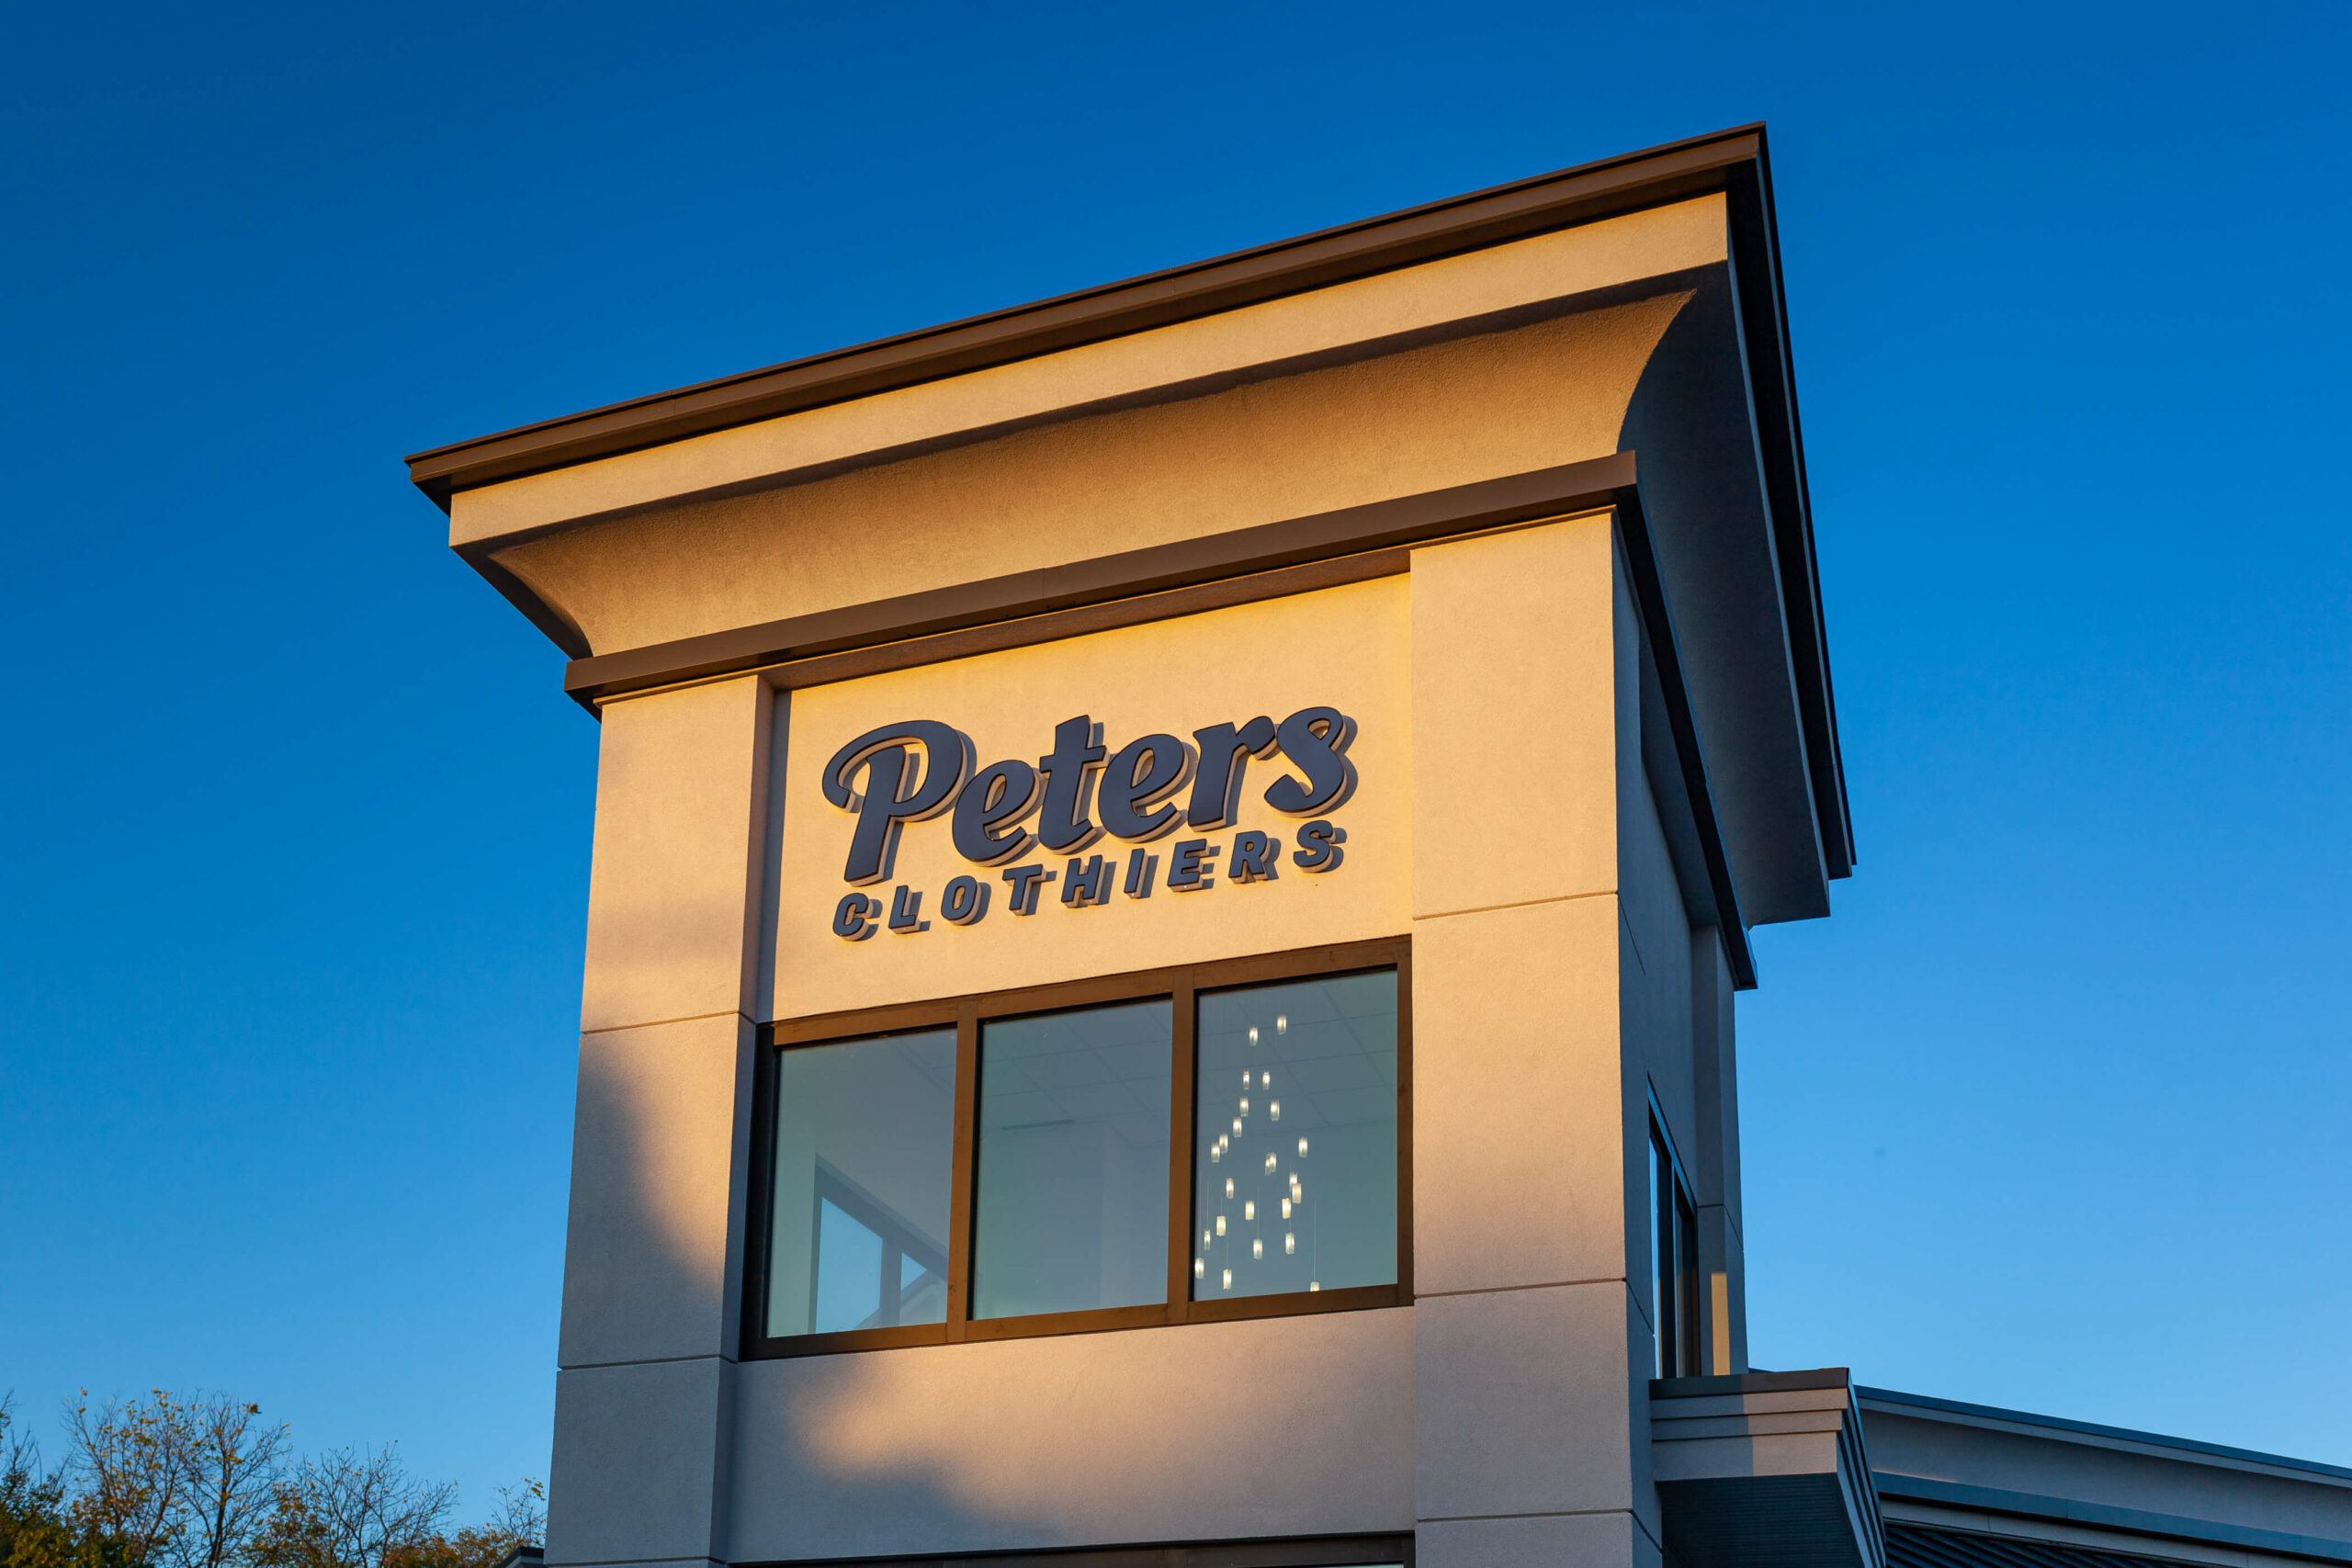 Peters Clothiers 5